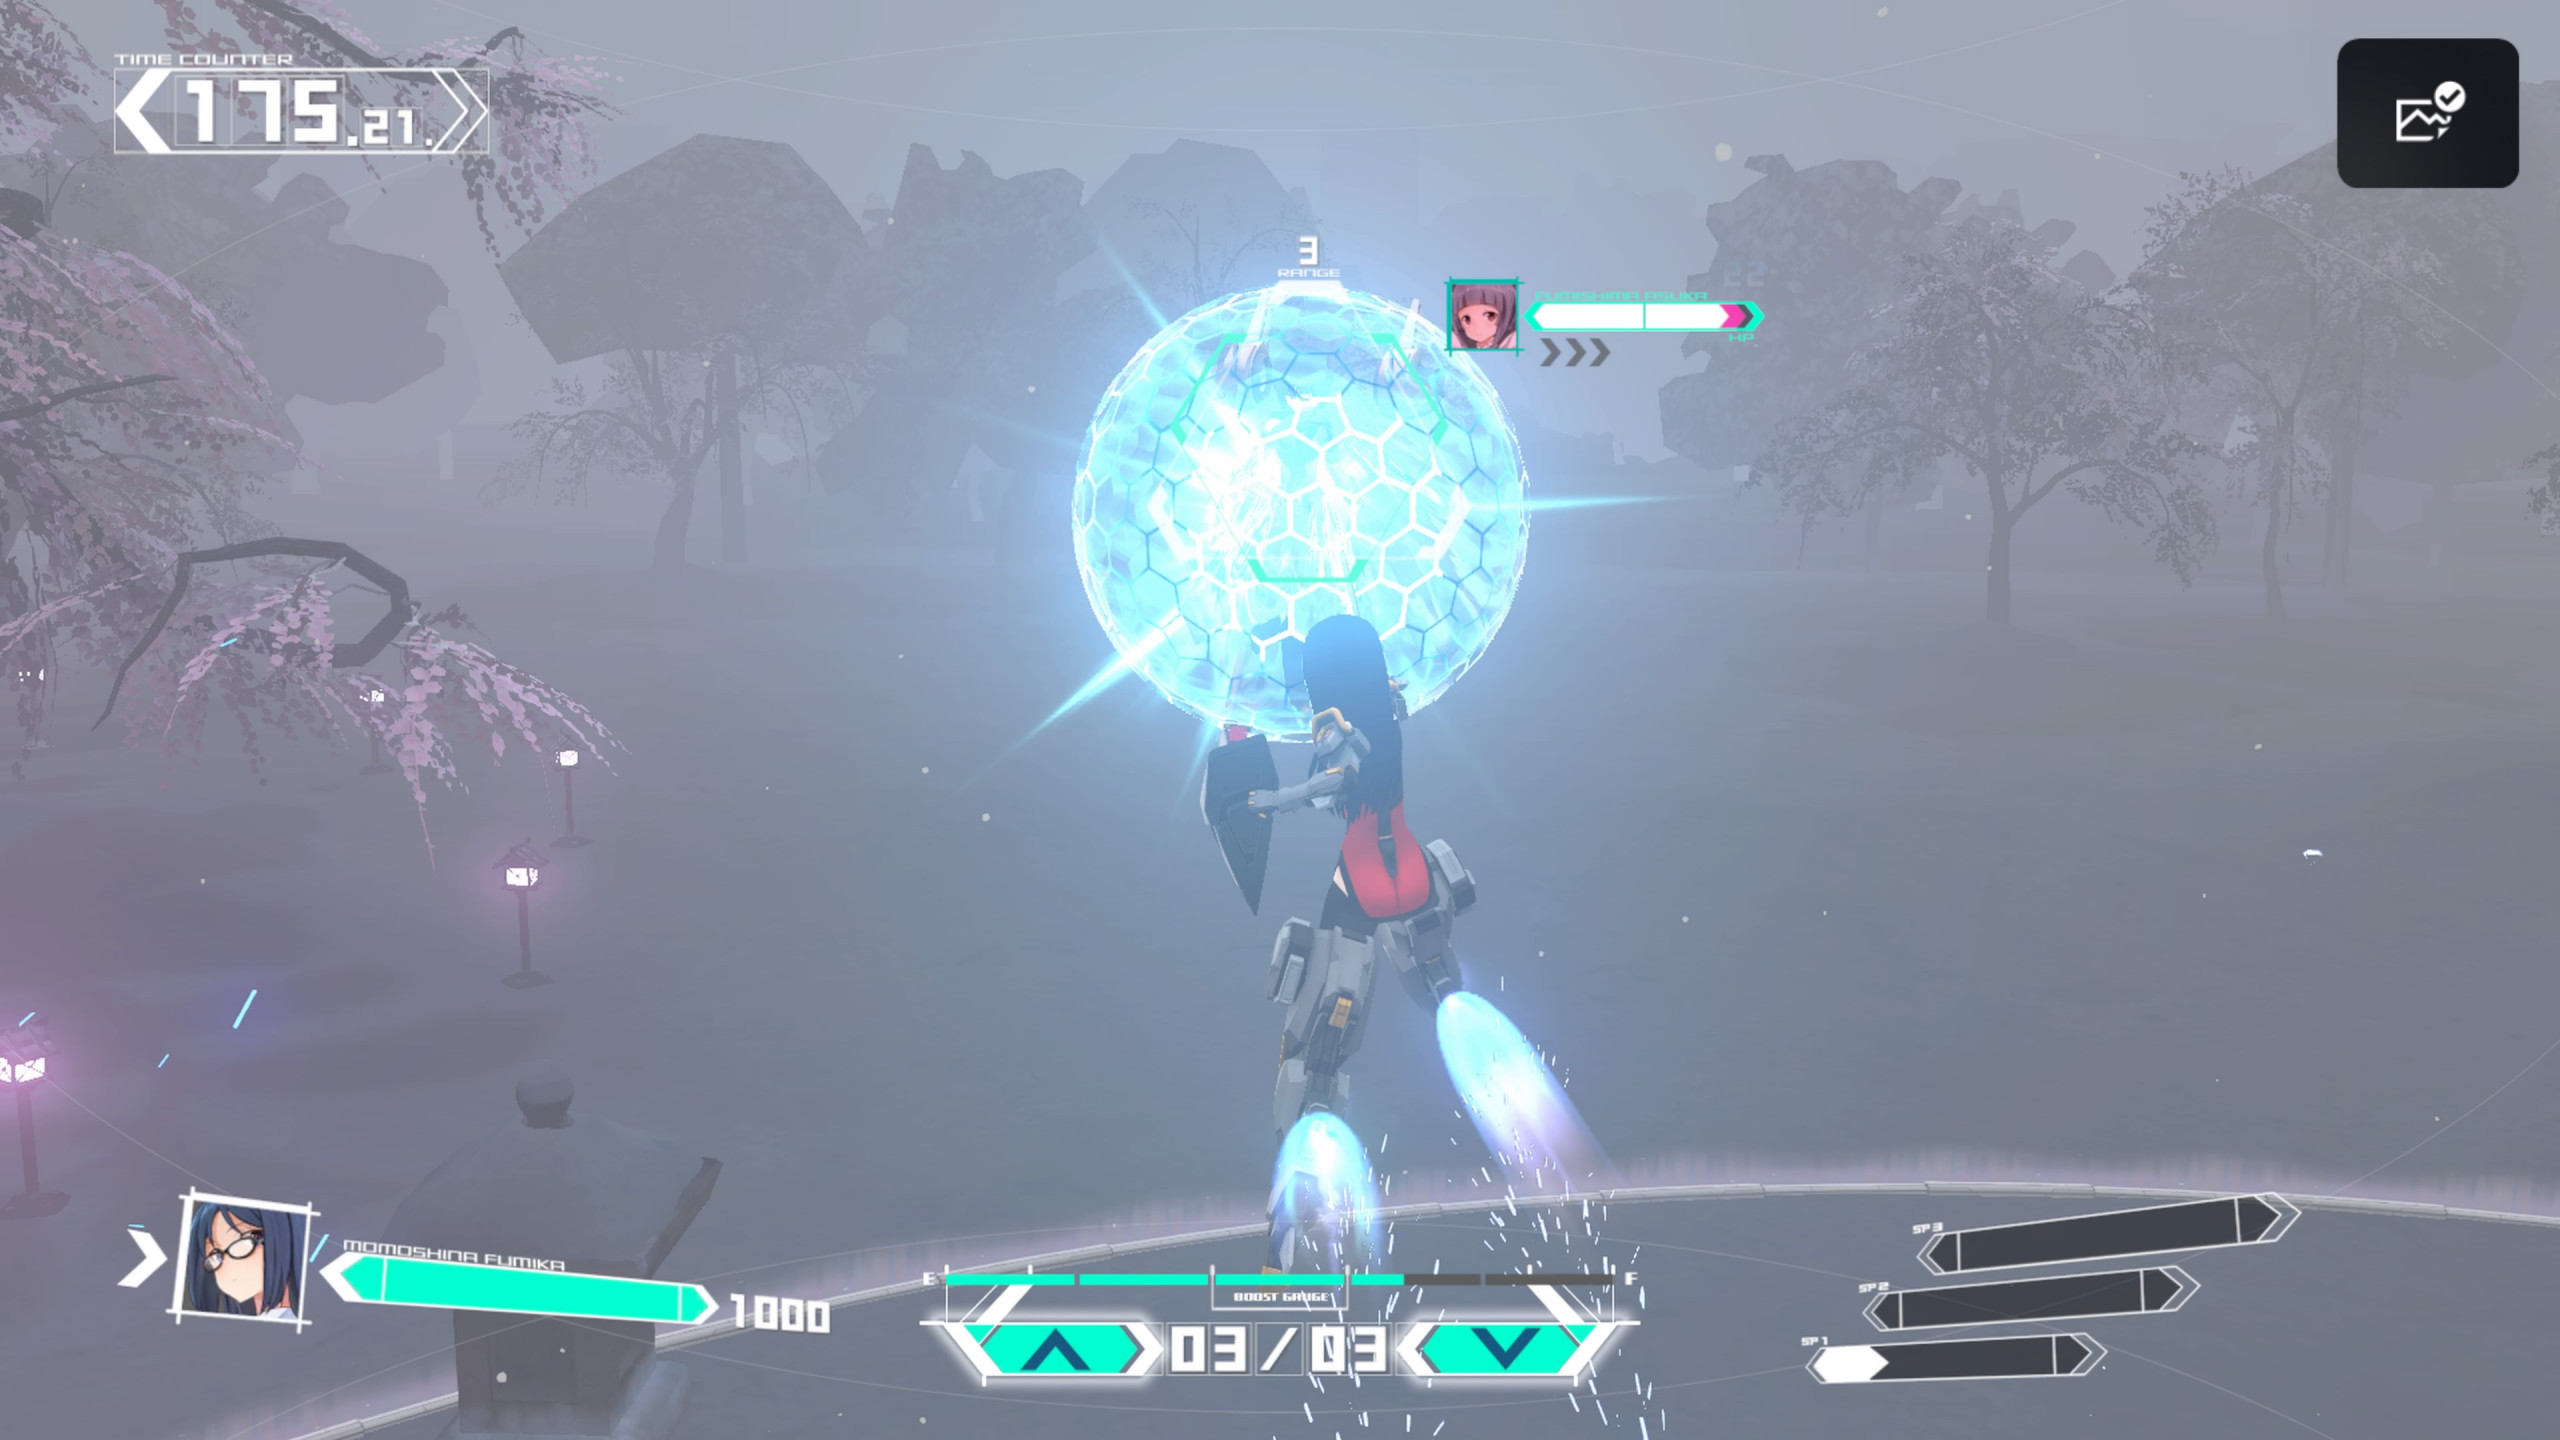 Mid combat the enemy has put up their shield to defend themselves. the hud around displays the health and a timer can be seen above.